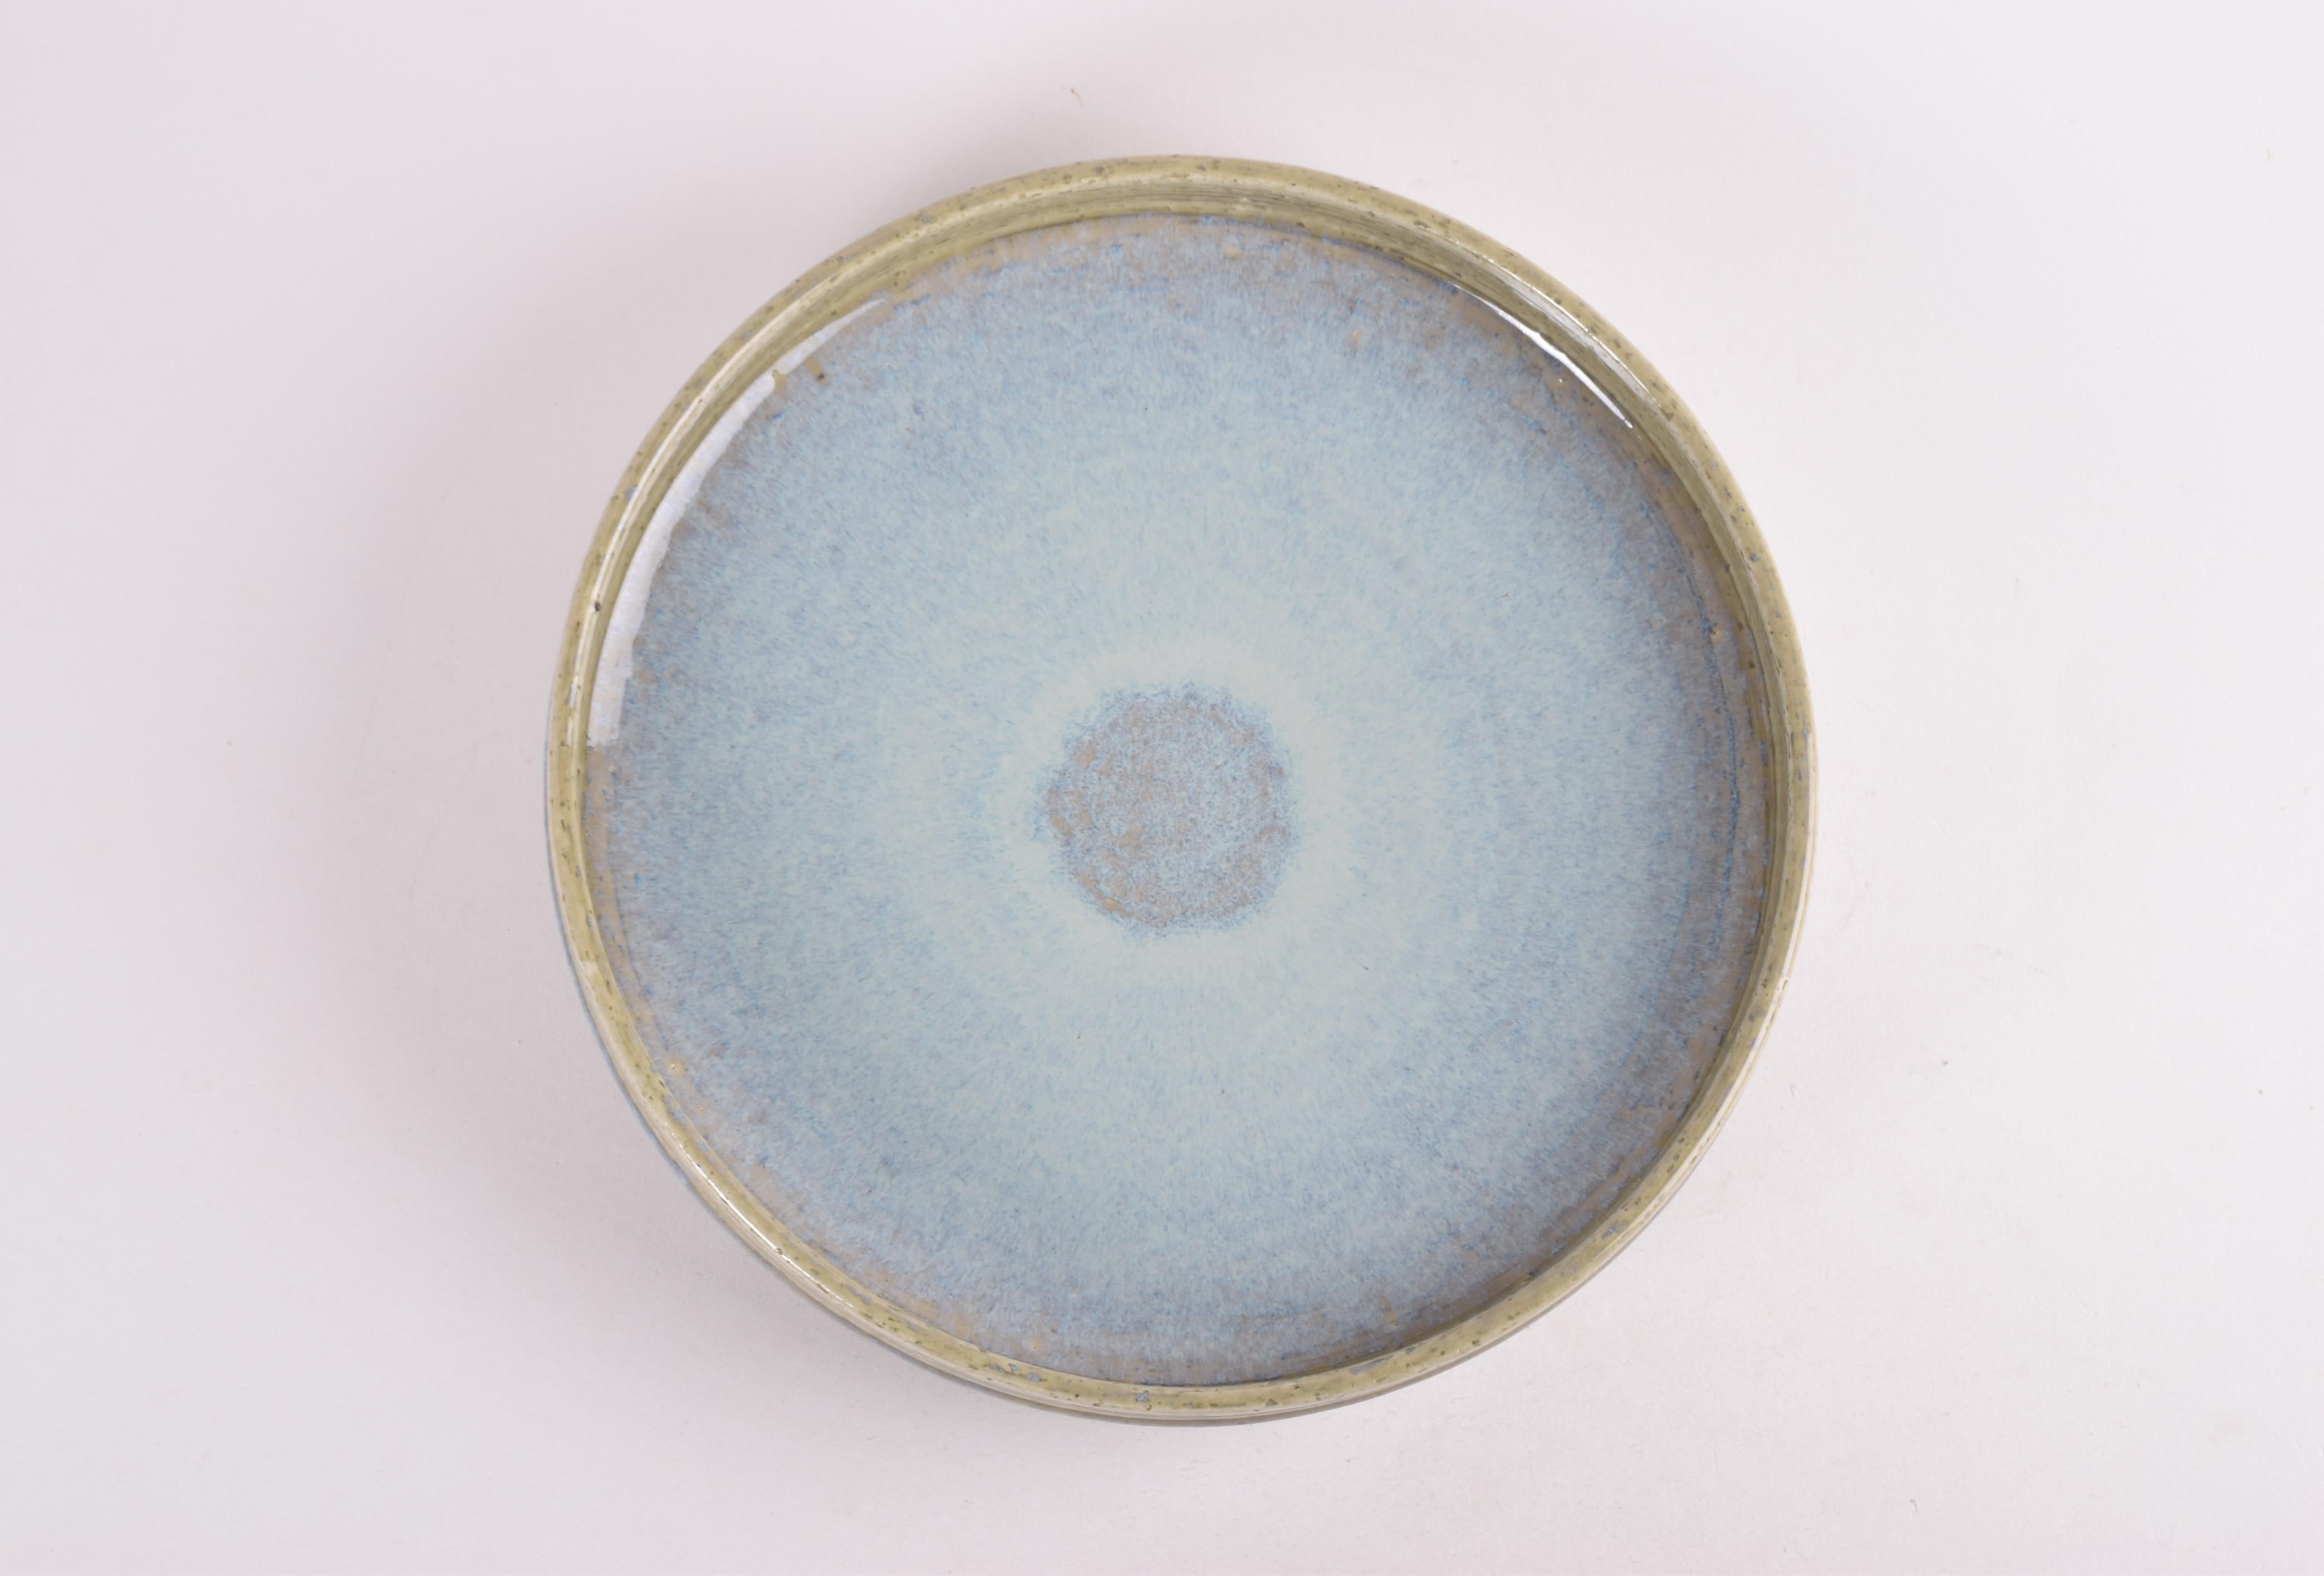 A large ceramic charger by Per Linnemann-Schmidt for Palshus Denmark. Made in the 1960s.
It is made with chamotte clay which gives a rough and vivid surface. The glaze is pale blue in center turning into green. On outside a blue ribbon contrasts